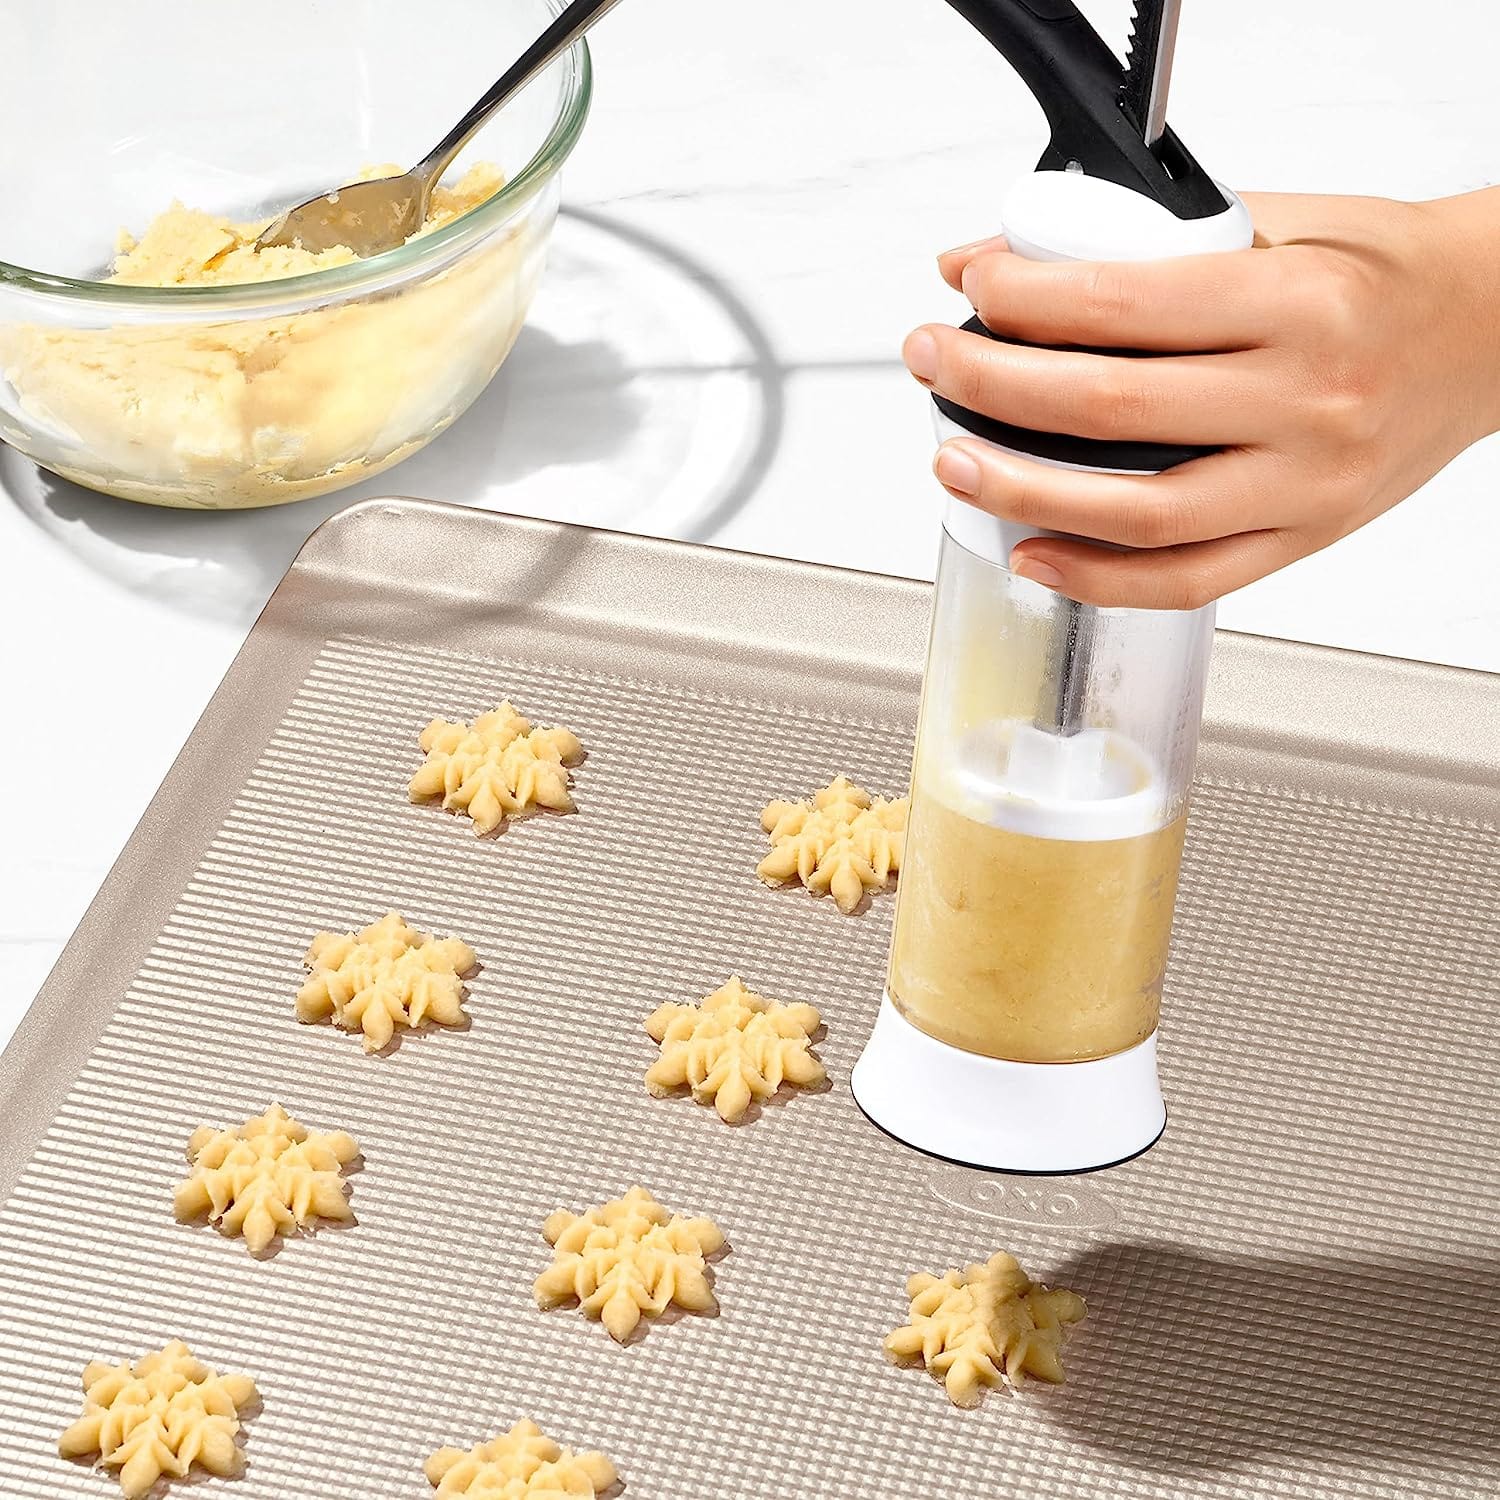 How To Use An OXO Cookie Press. (Plus 4 Cookie Recipes